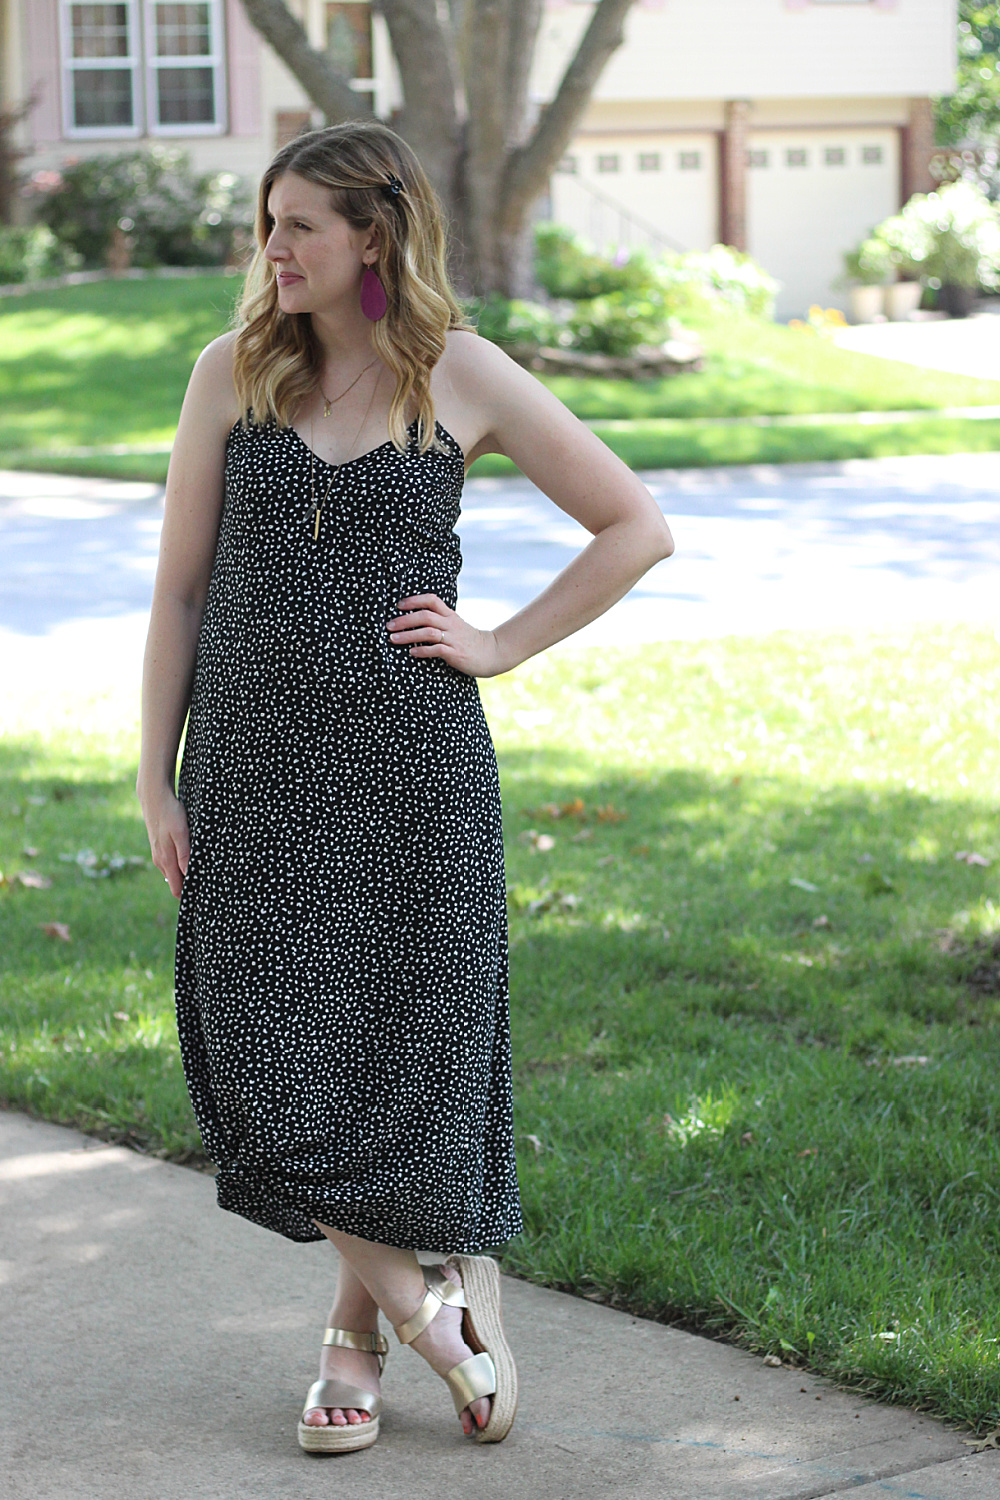 maxi dress outfit - simple summer look | shealennon.com 